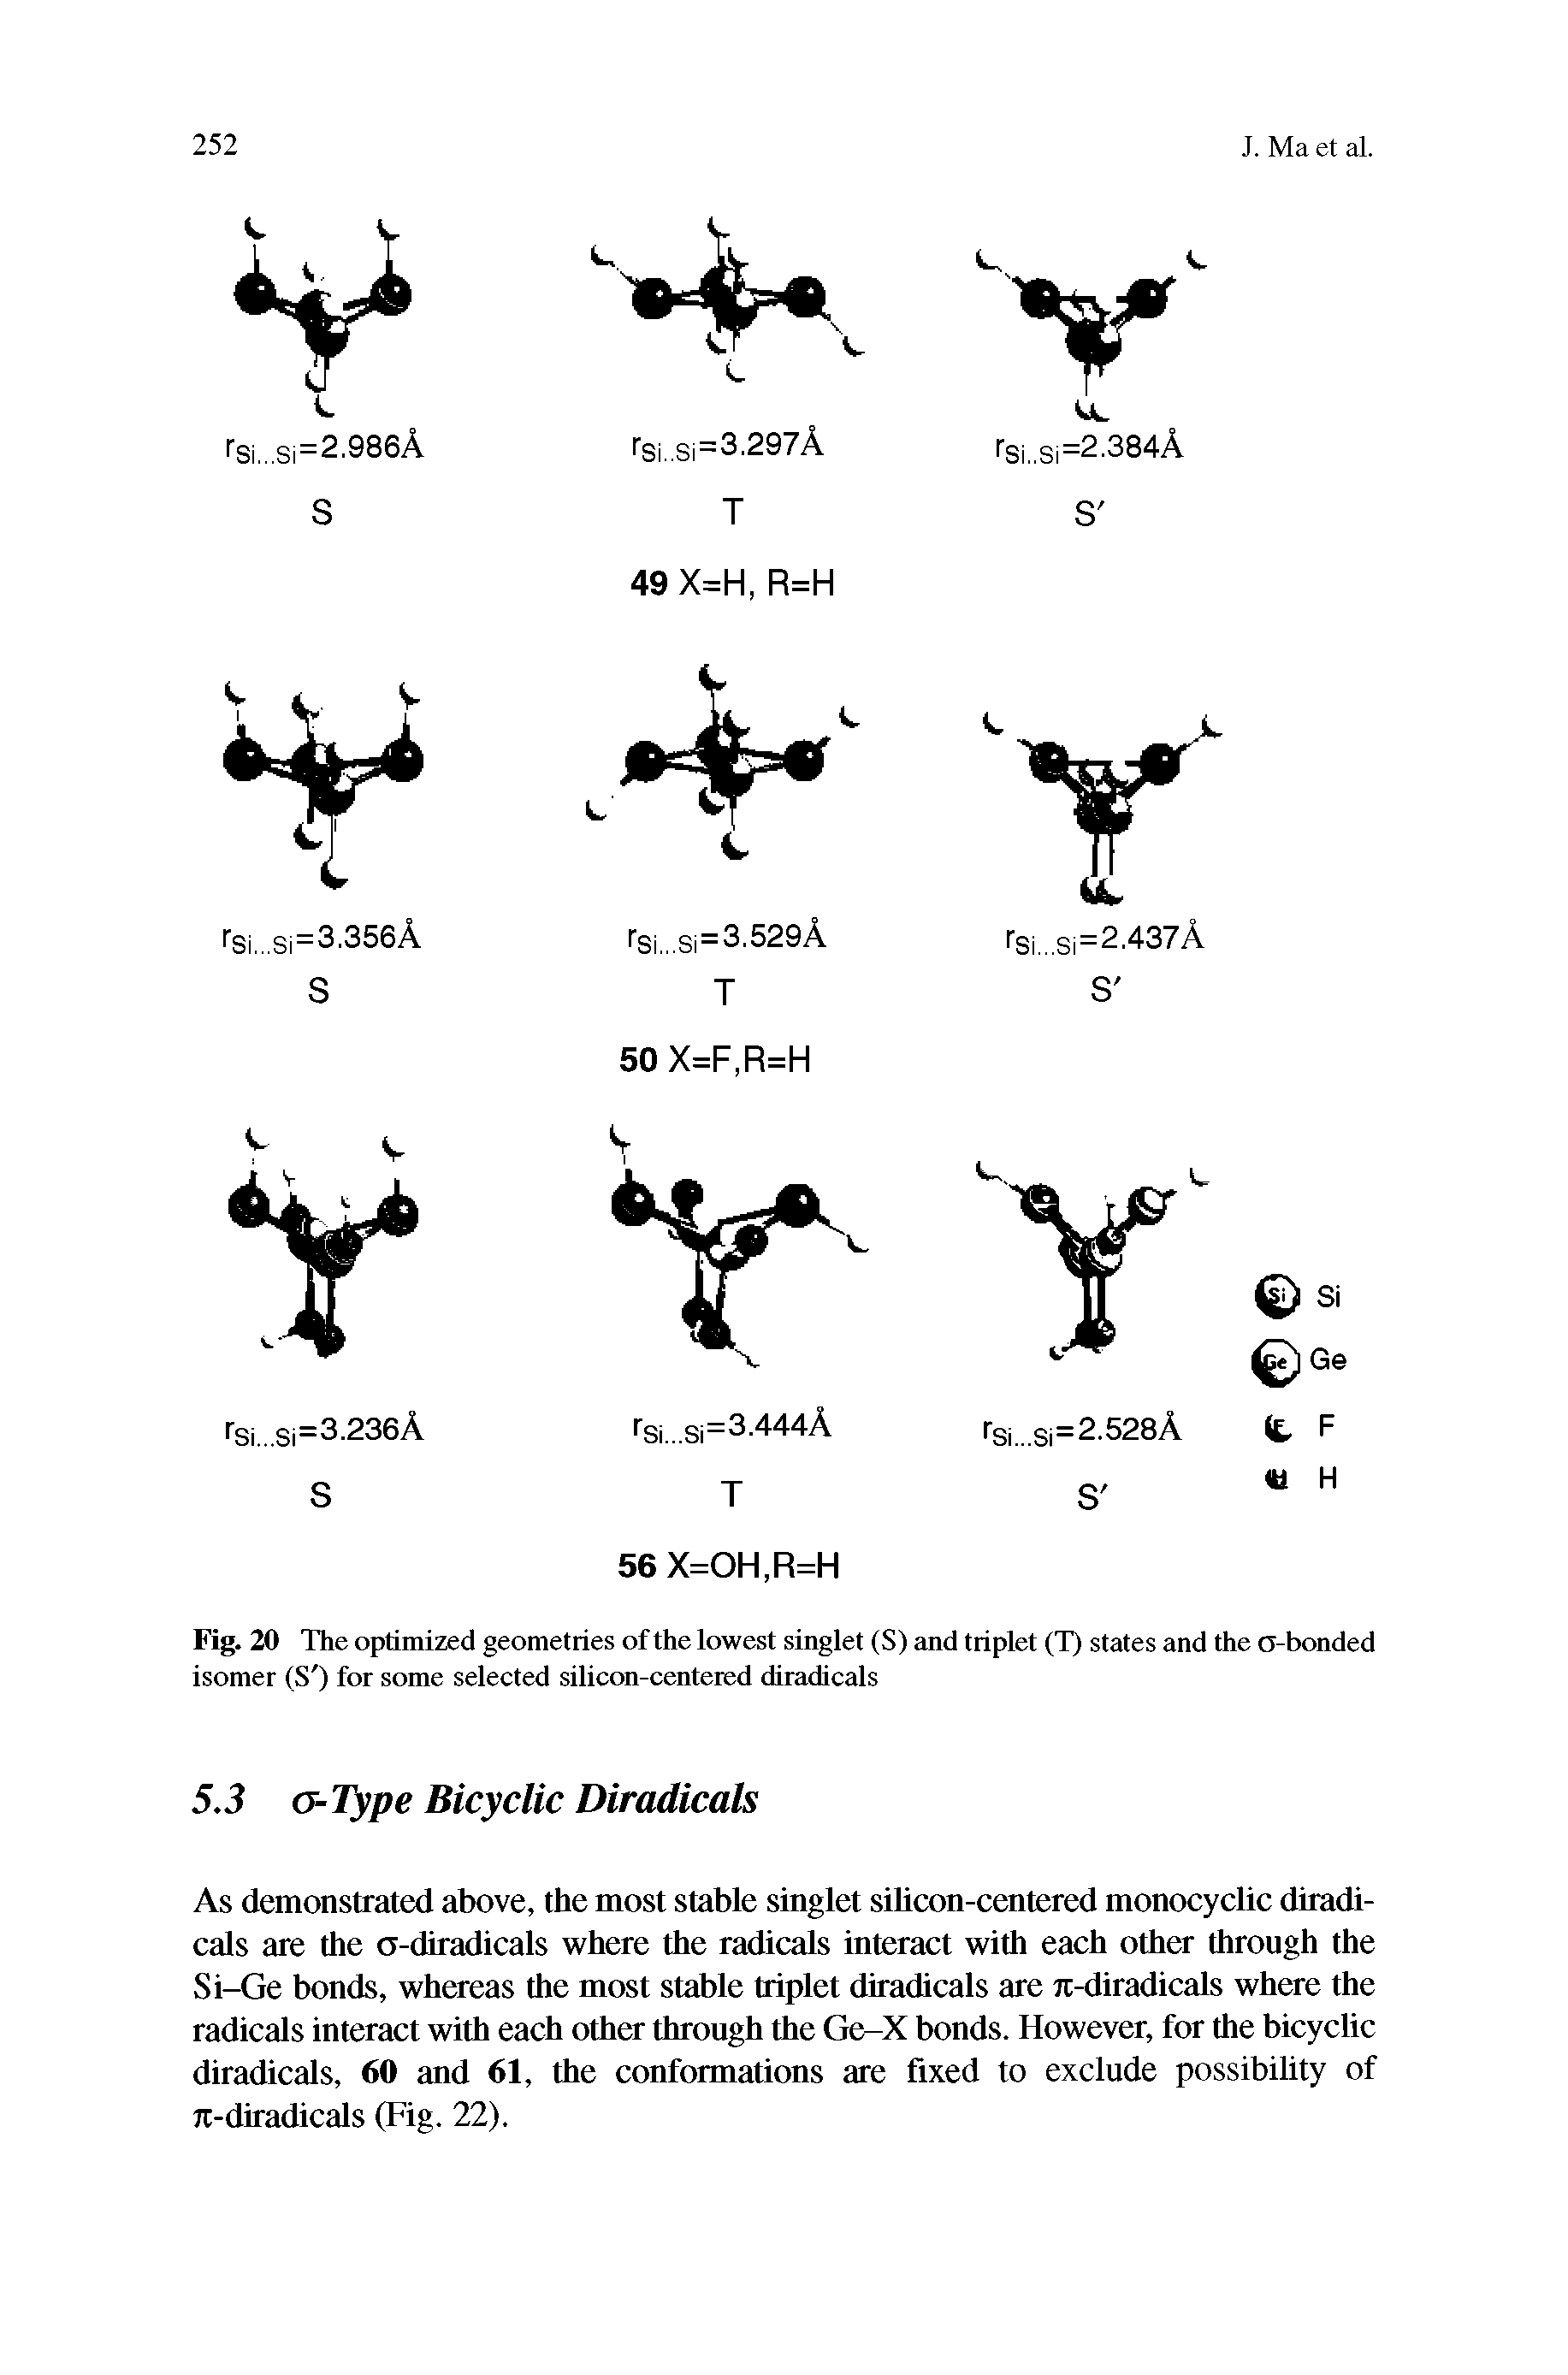 Fig. 20 The optimized geometries of the lowest singlet (S) and triplet (T) states and the a-bonded isomer (S ) for some selected silicon-centered diradicals...